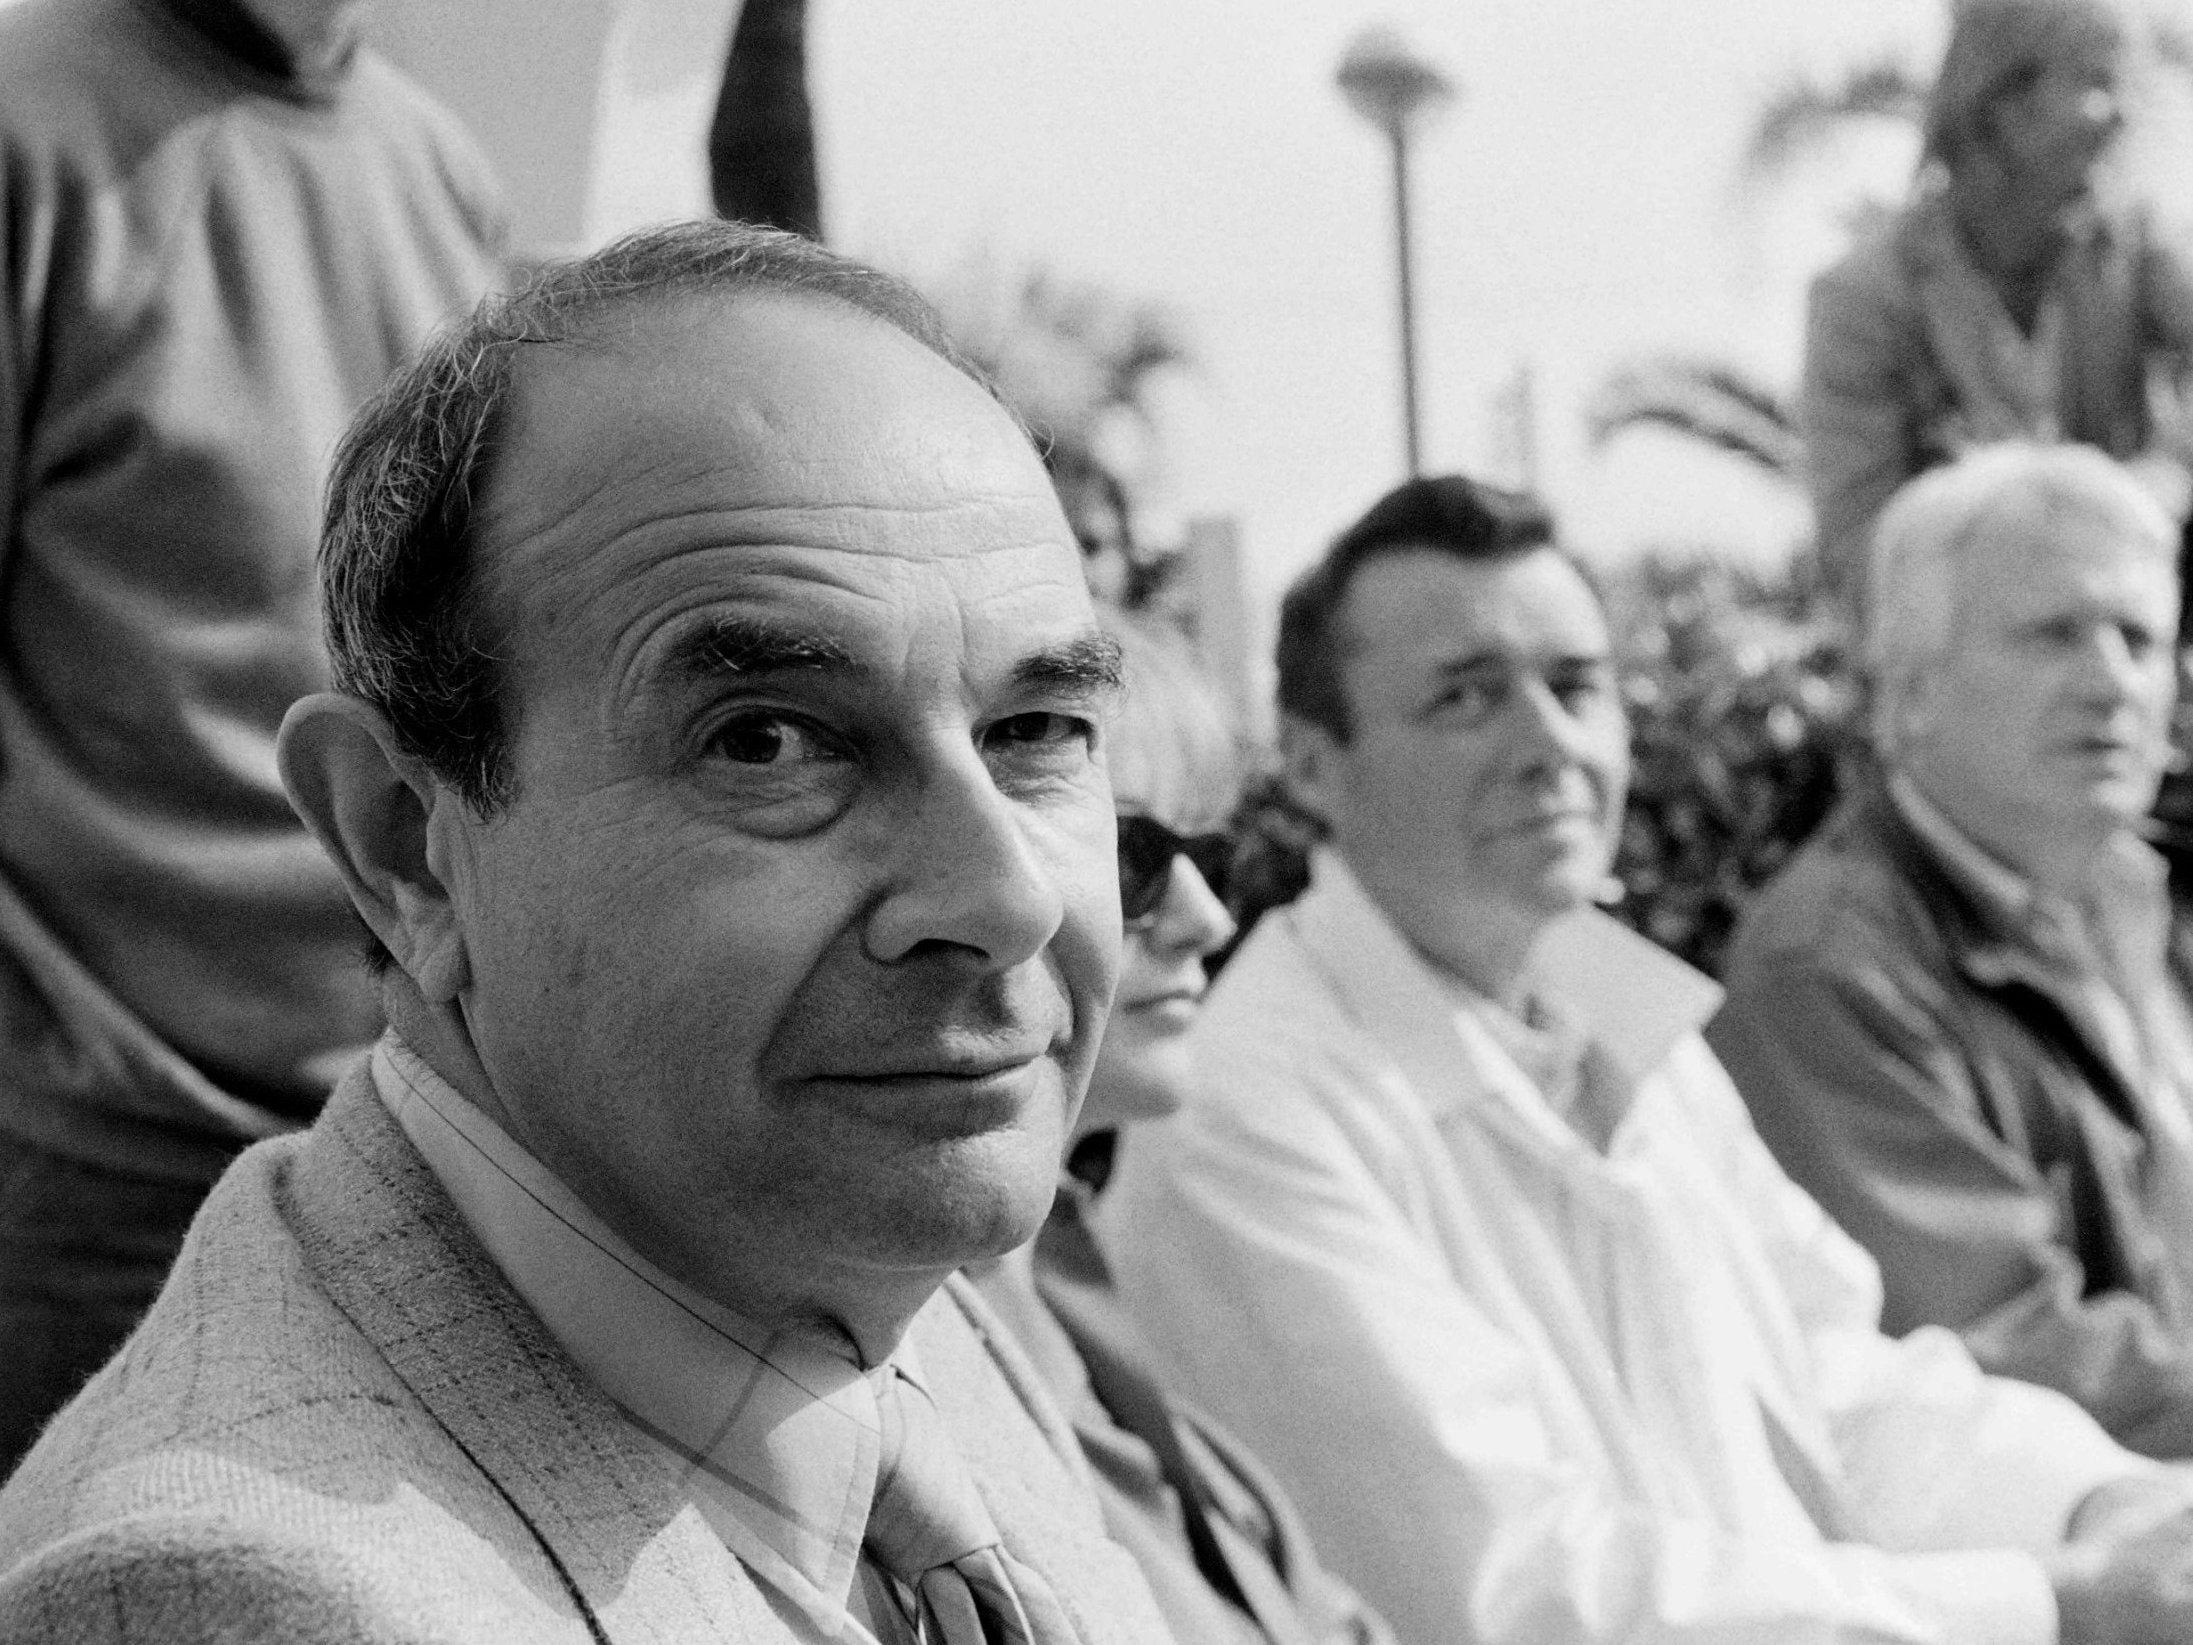 Stanley Donen at the 1984 International Film Festival in Cannes